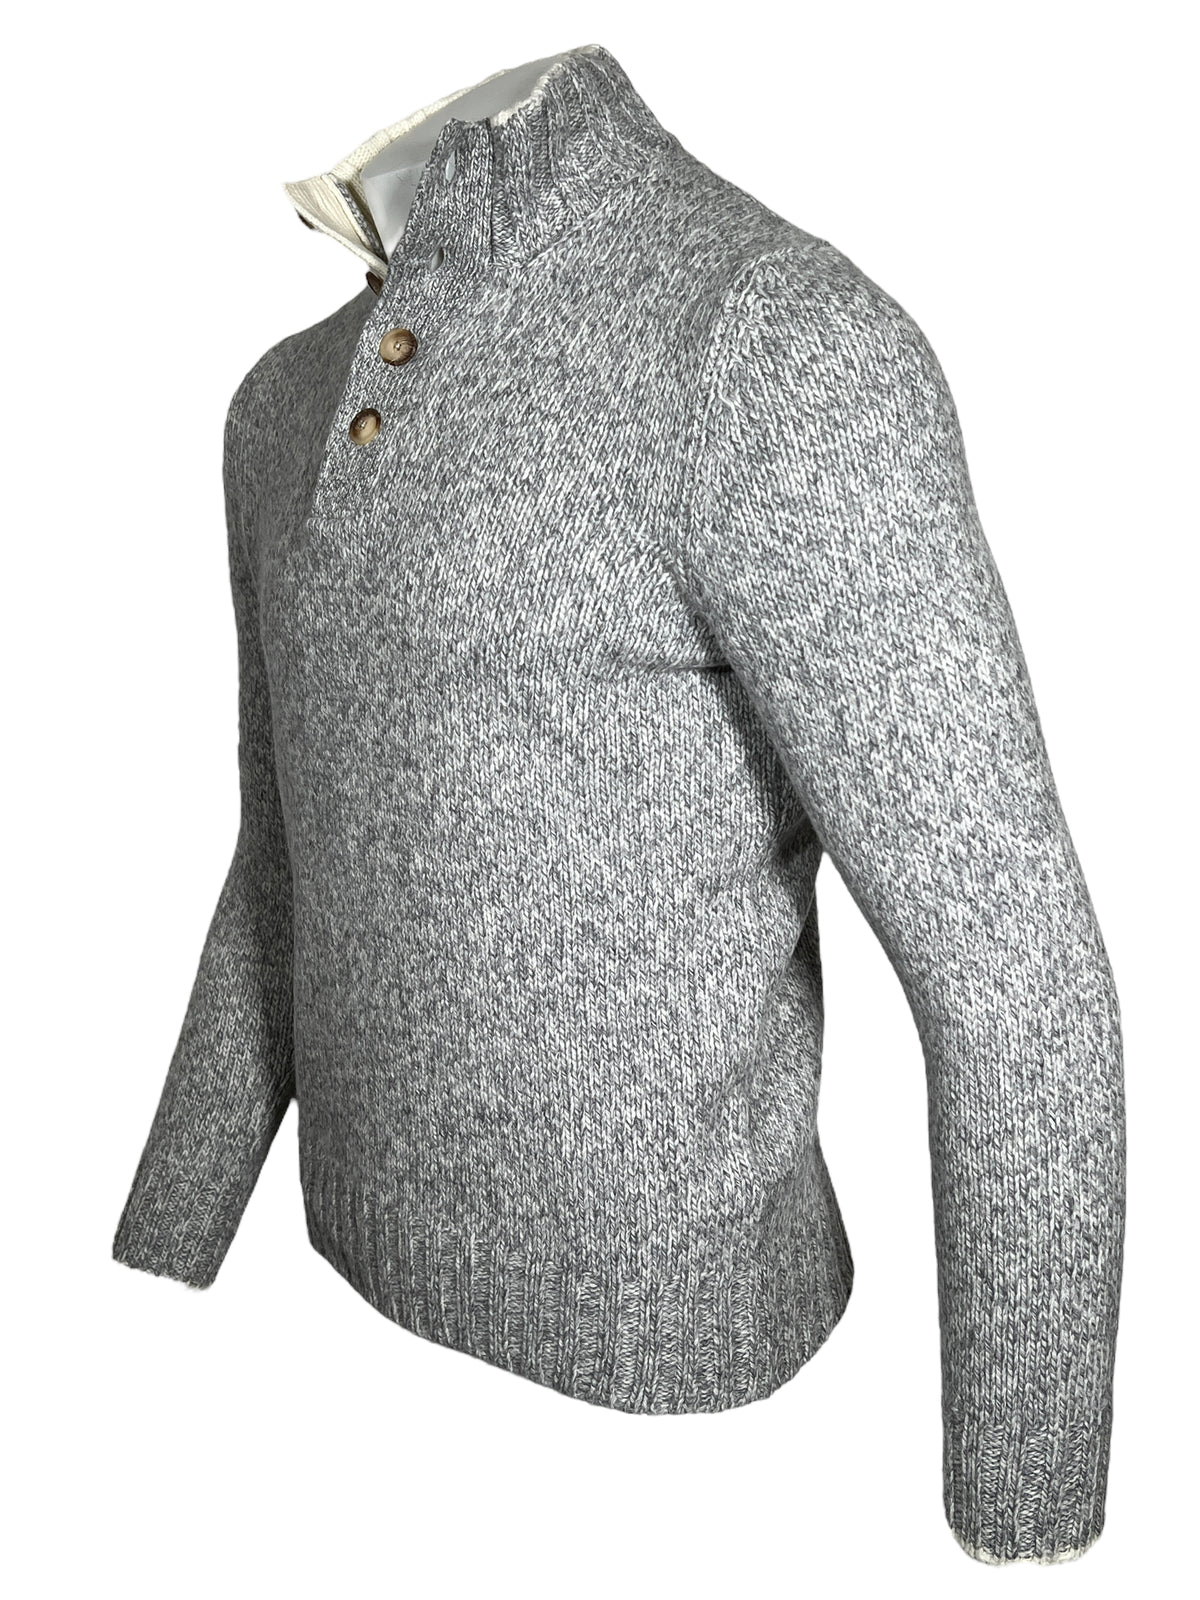 BUTTON DOWN MOULINE BUTTON MOCK SWEATER - LIGHT GREY/WHITE